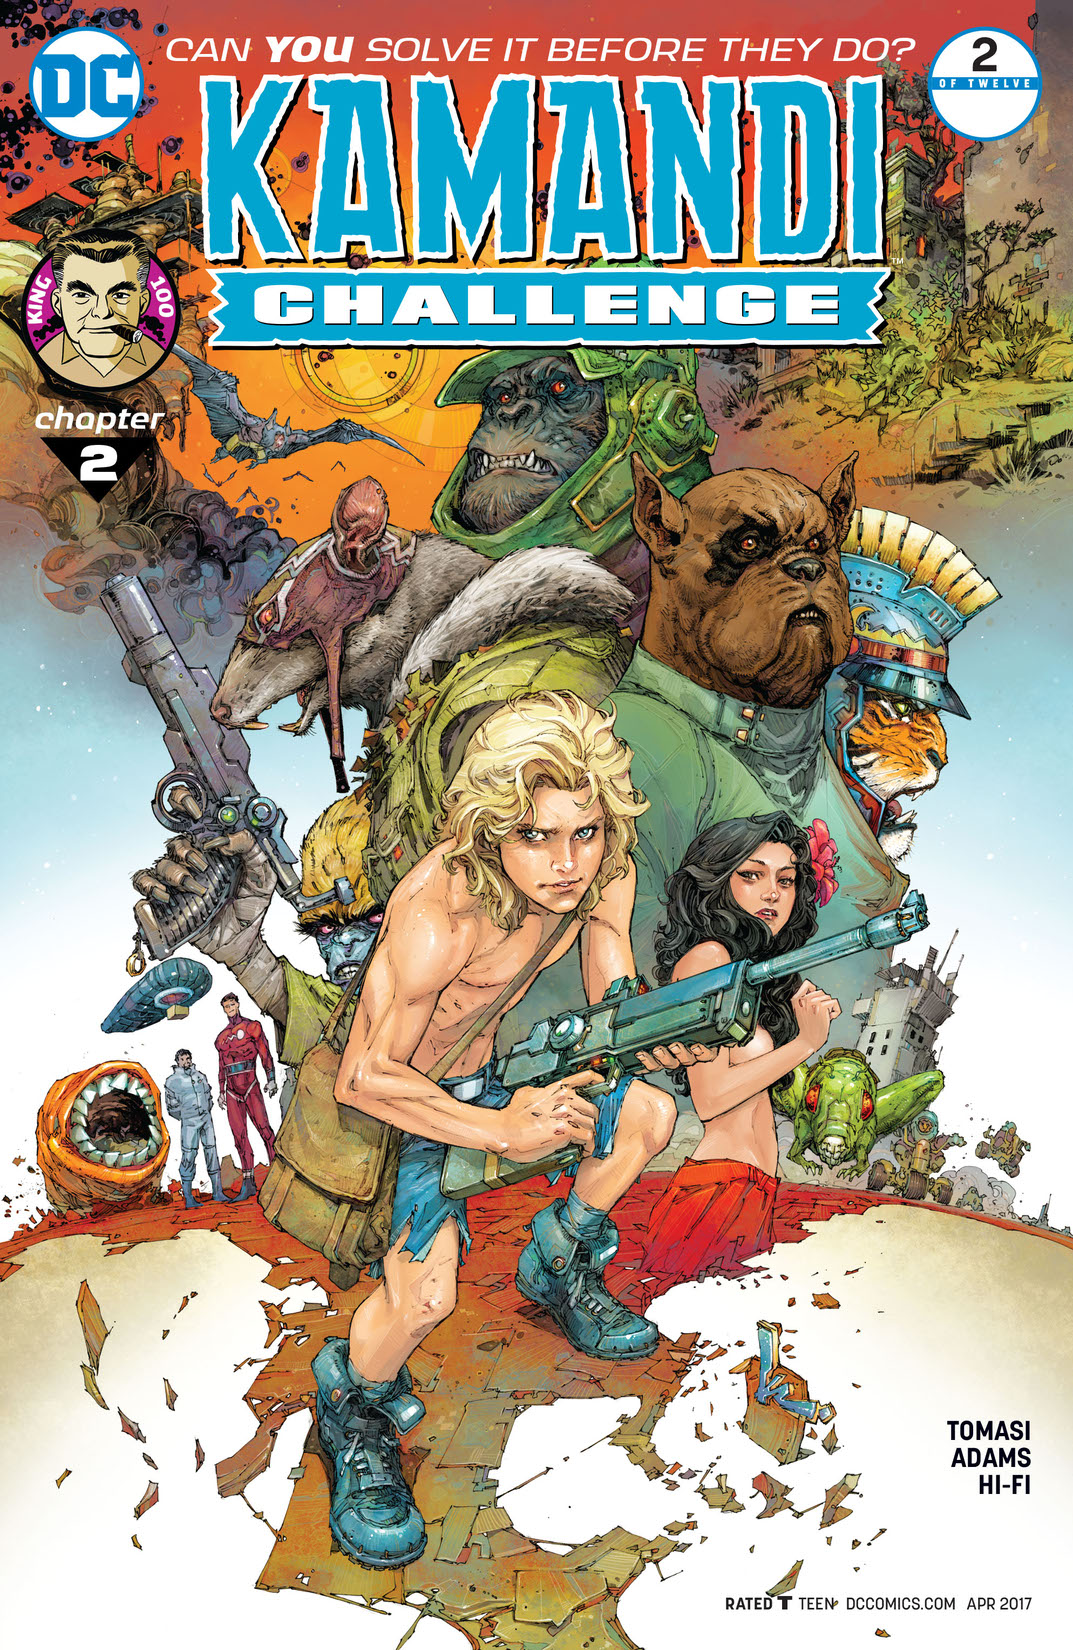 The Kamandi Challenge #2 preview images